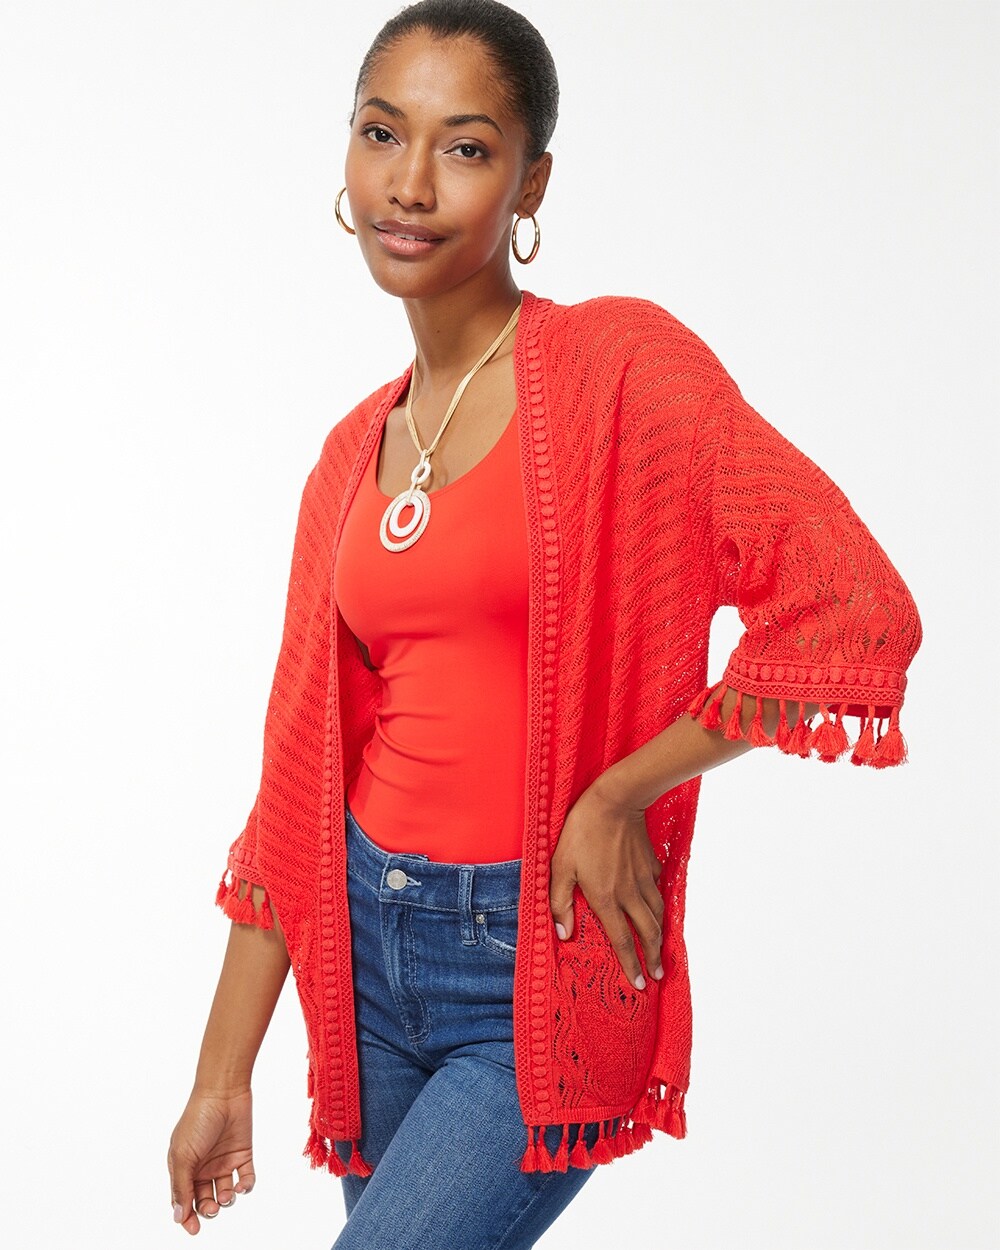 Summer Romance Tassel Trim Cardigan video preview image, click to start video